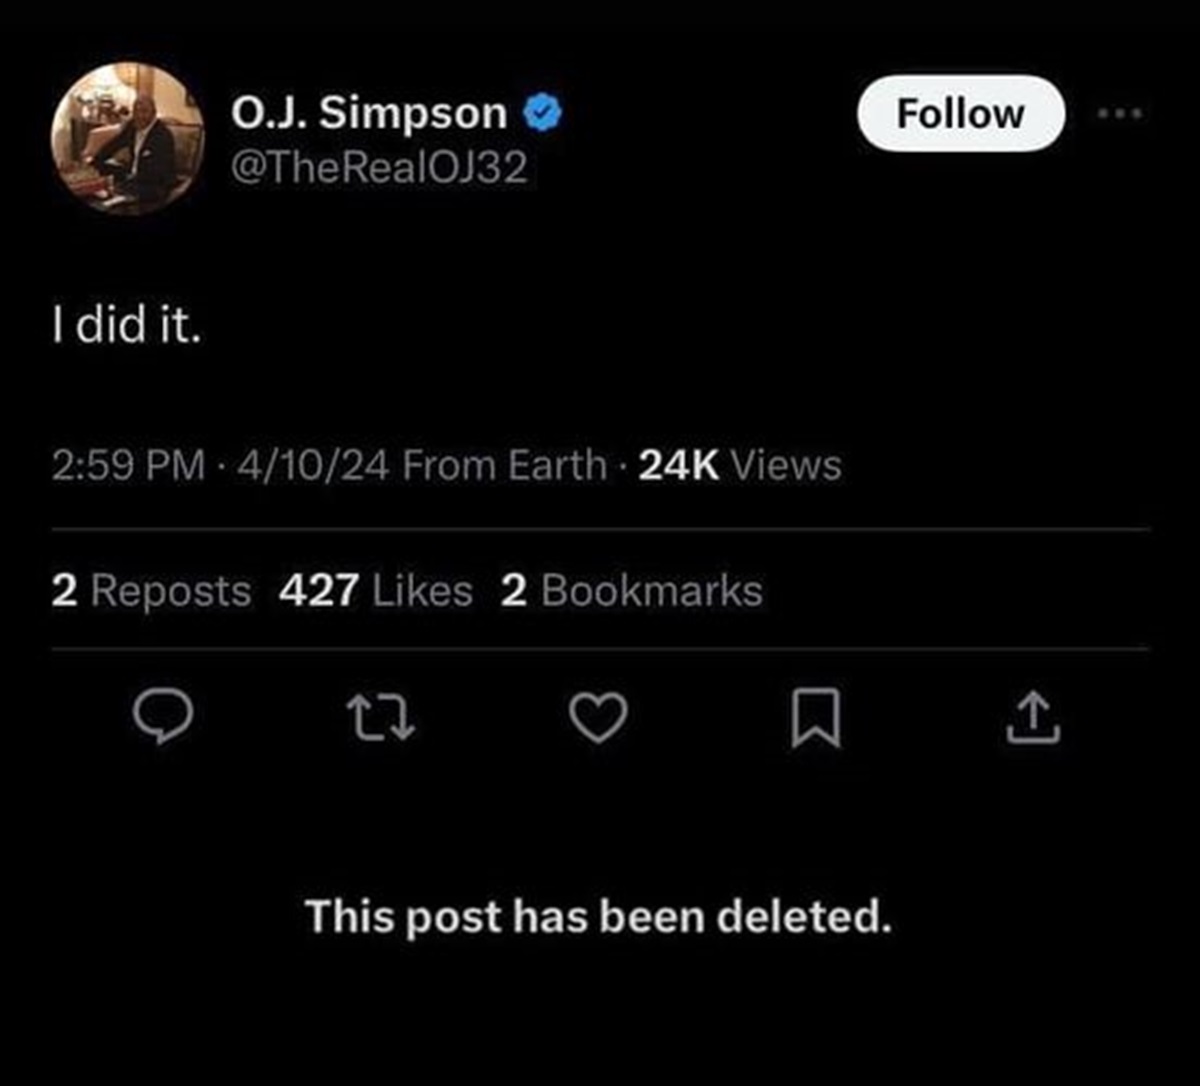 O. J. Simpson - I did it. O.J. Simpson 41024 From Earth 24K Views 2 Reposts 427 2 Bookmarks 1 This post has been deleted.